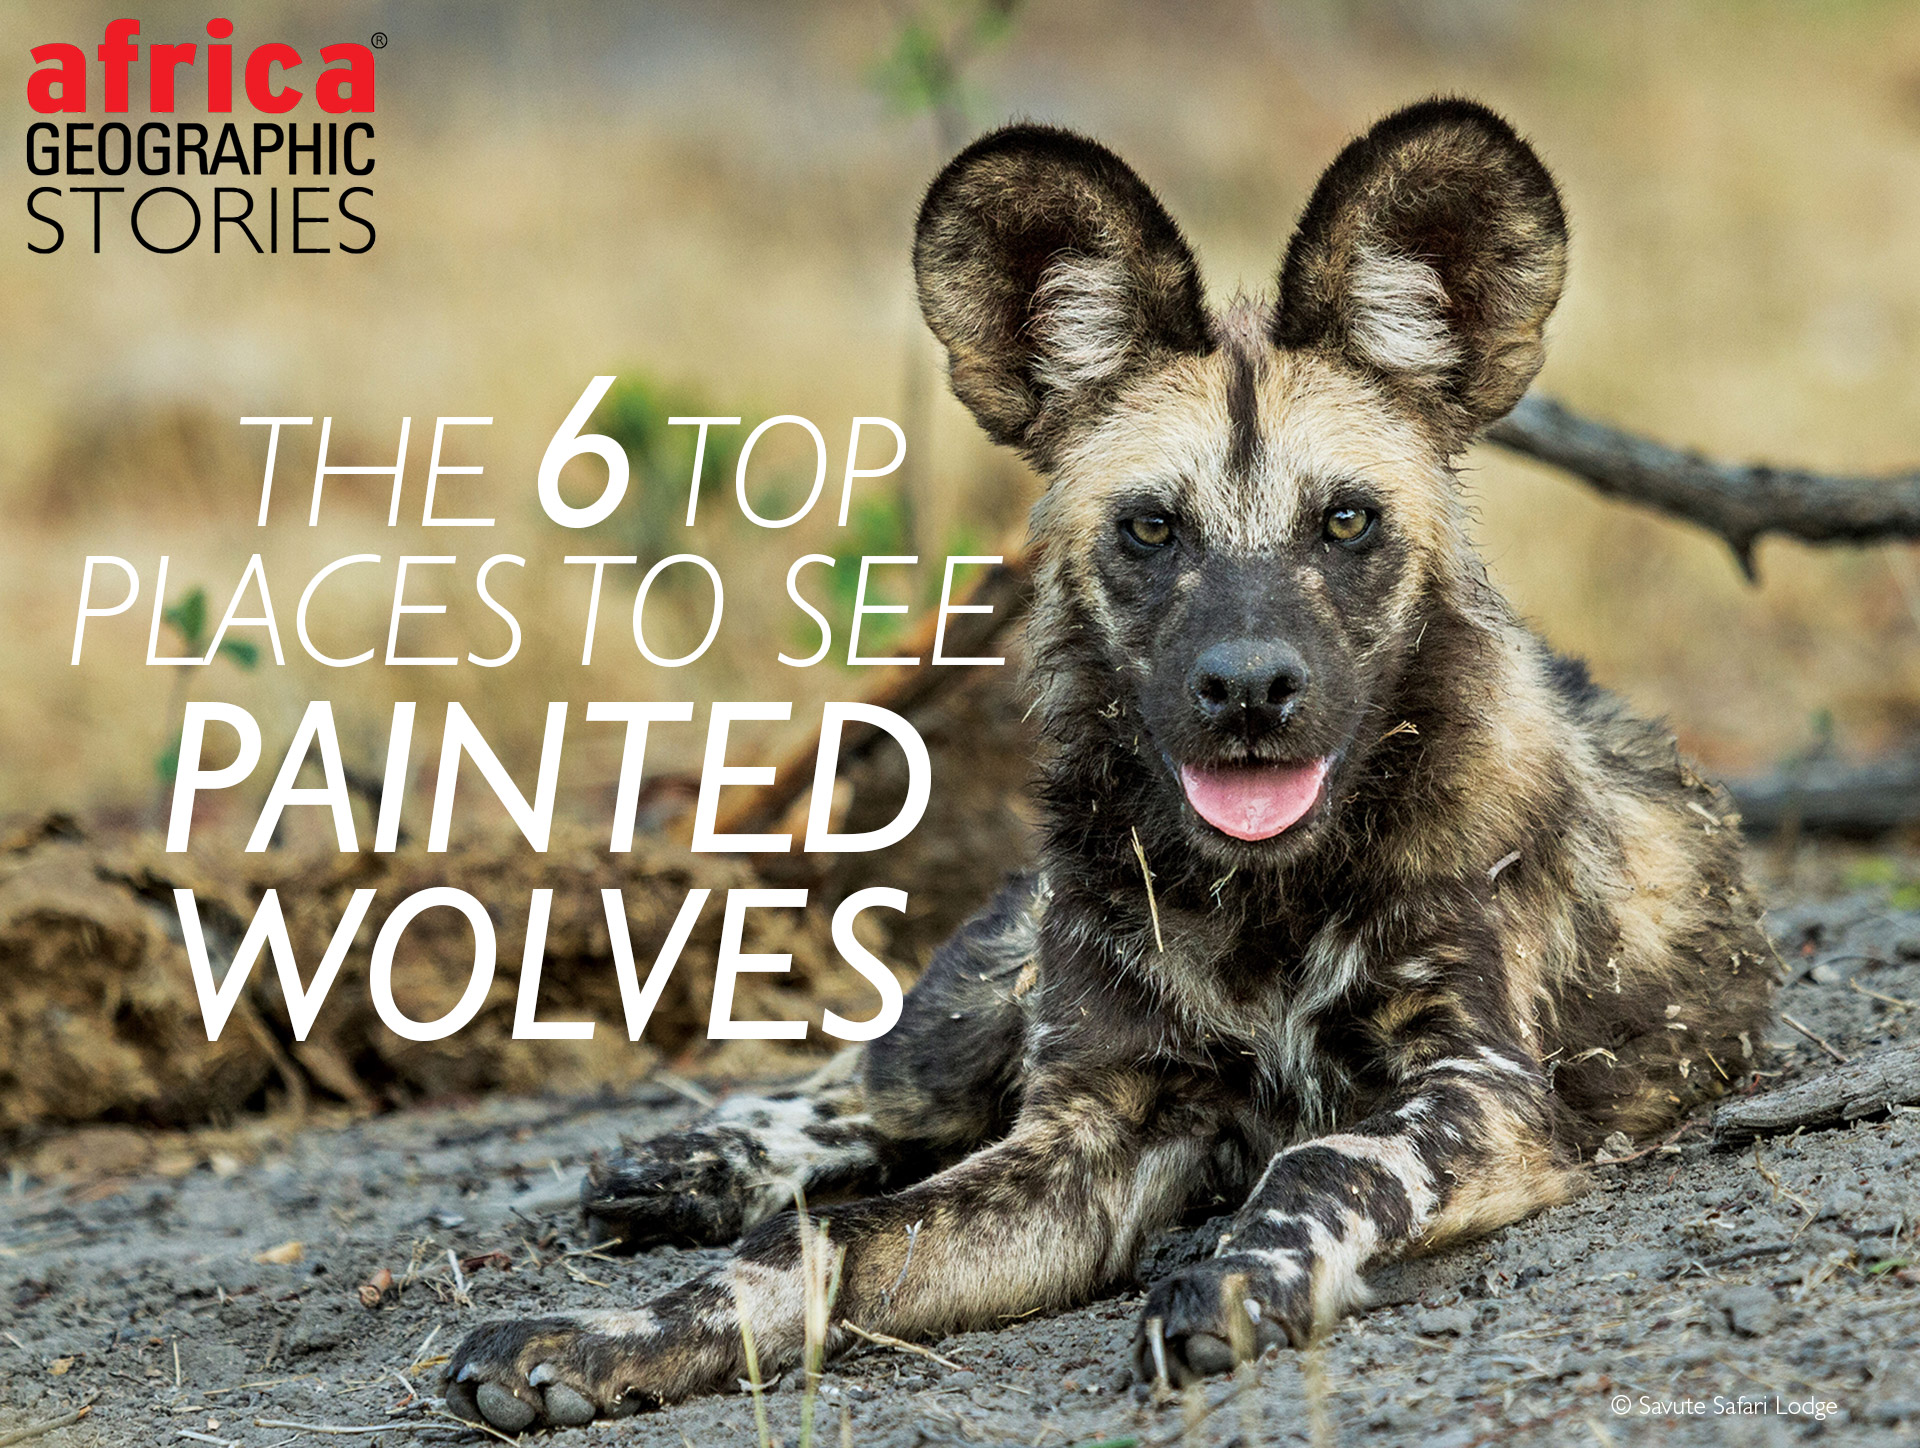 African wild dog facts